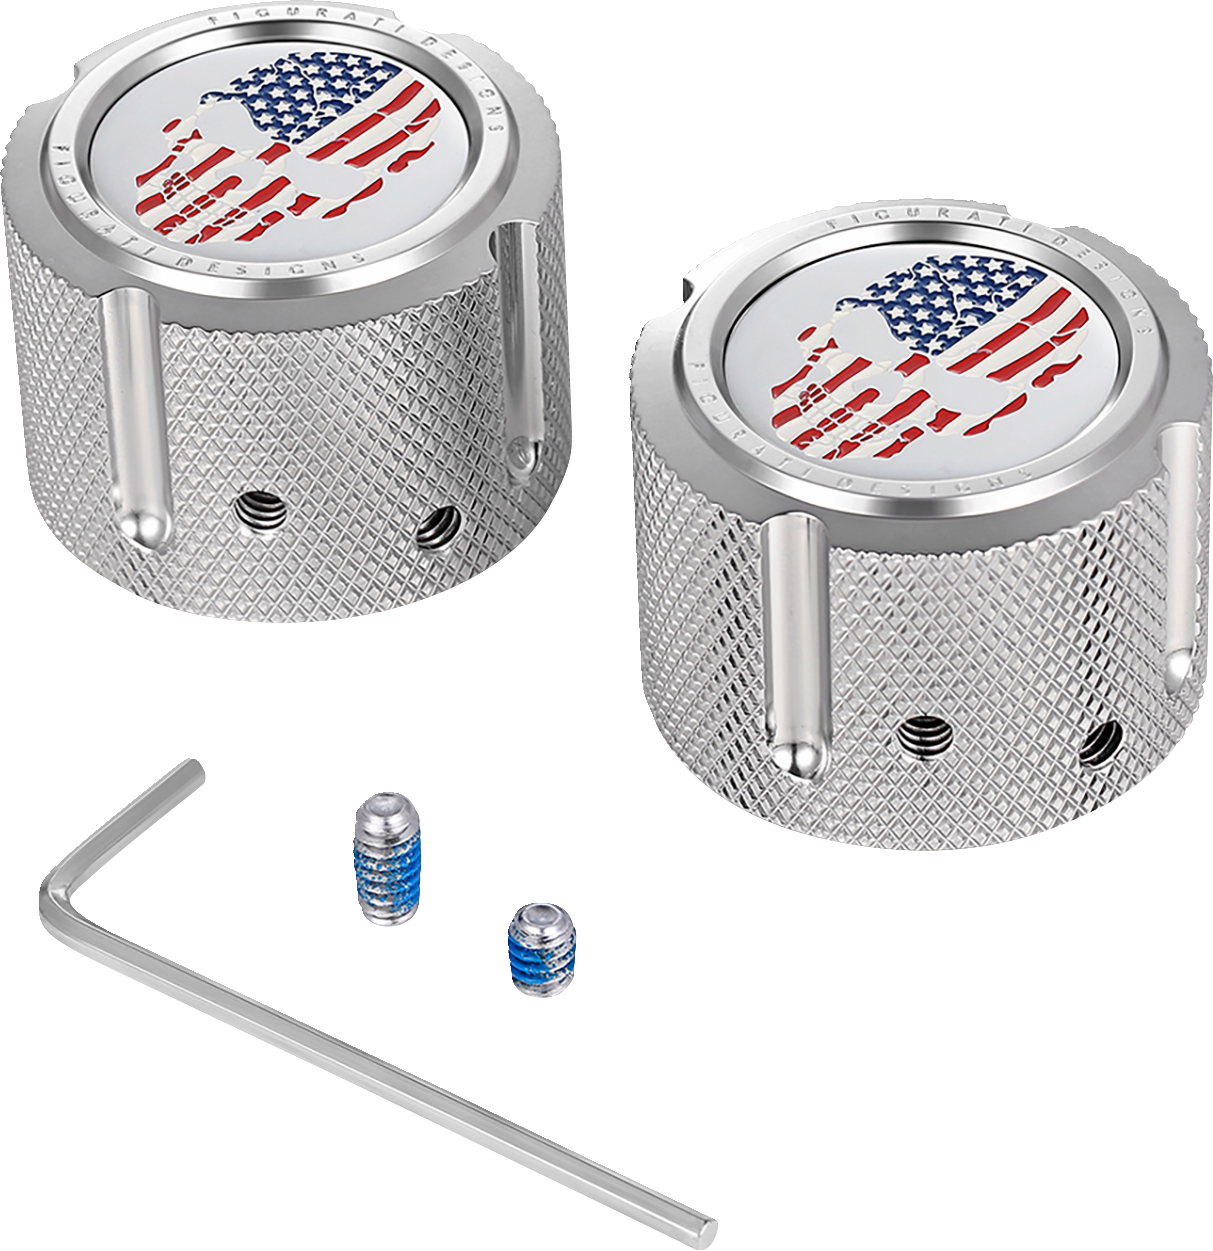 Figurati Designs Skull Flag Front Axle Nut Chrome Covers for 2002-2022 Harley